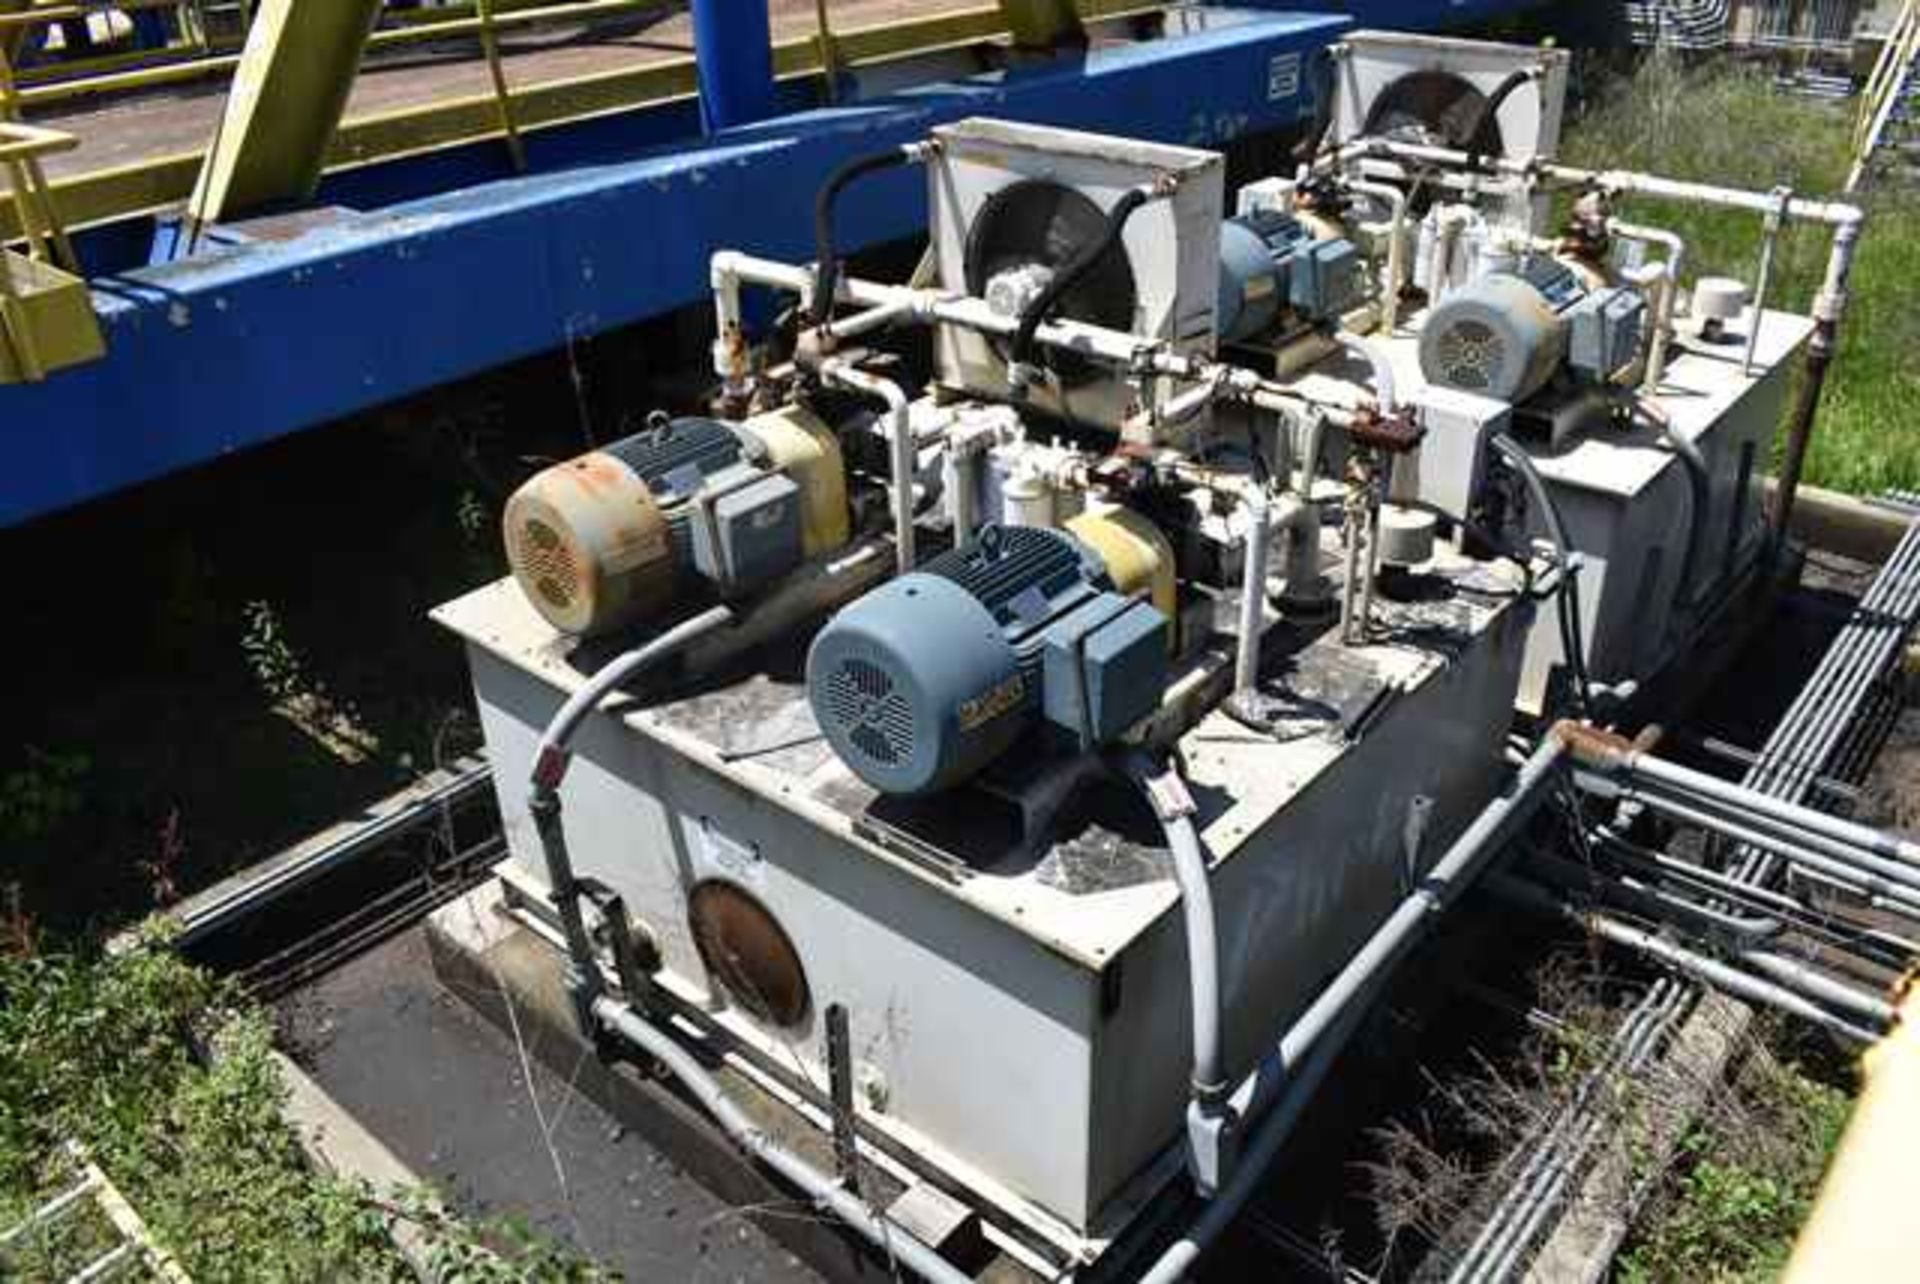 Thermal Transfer Products Hydraulic Power Unit, Includes (2) 75 HP Motors & Pump, ID #01-HYD-02A and - Image 2 of 2